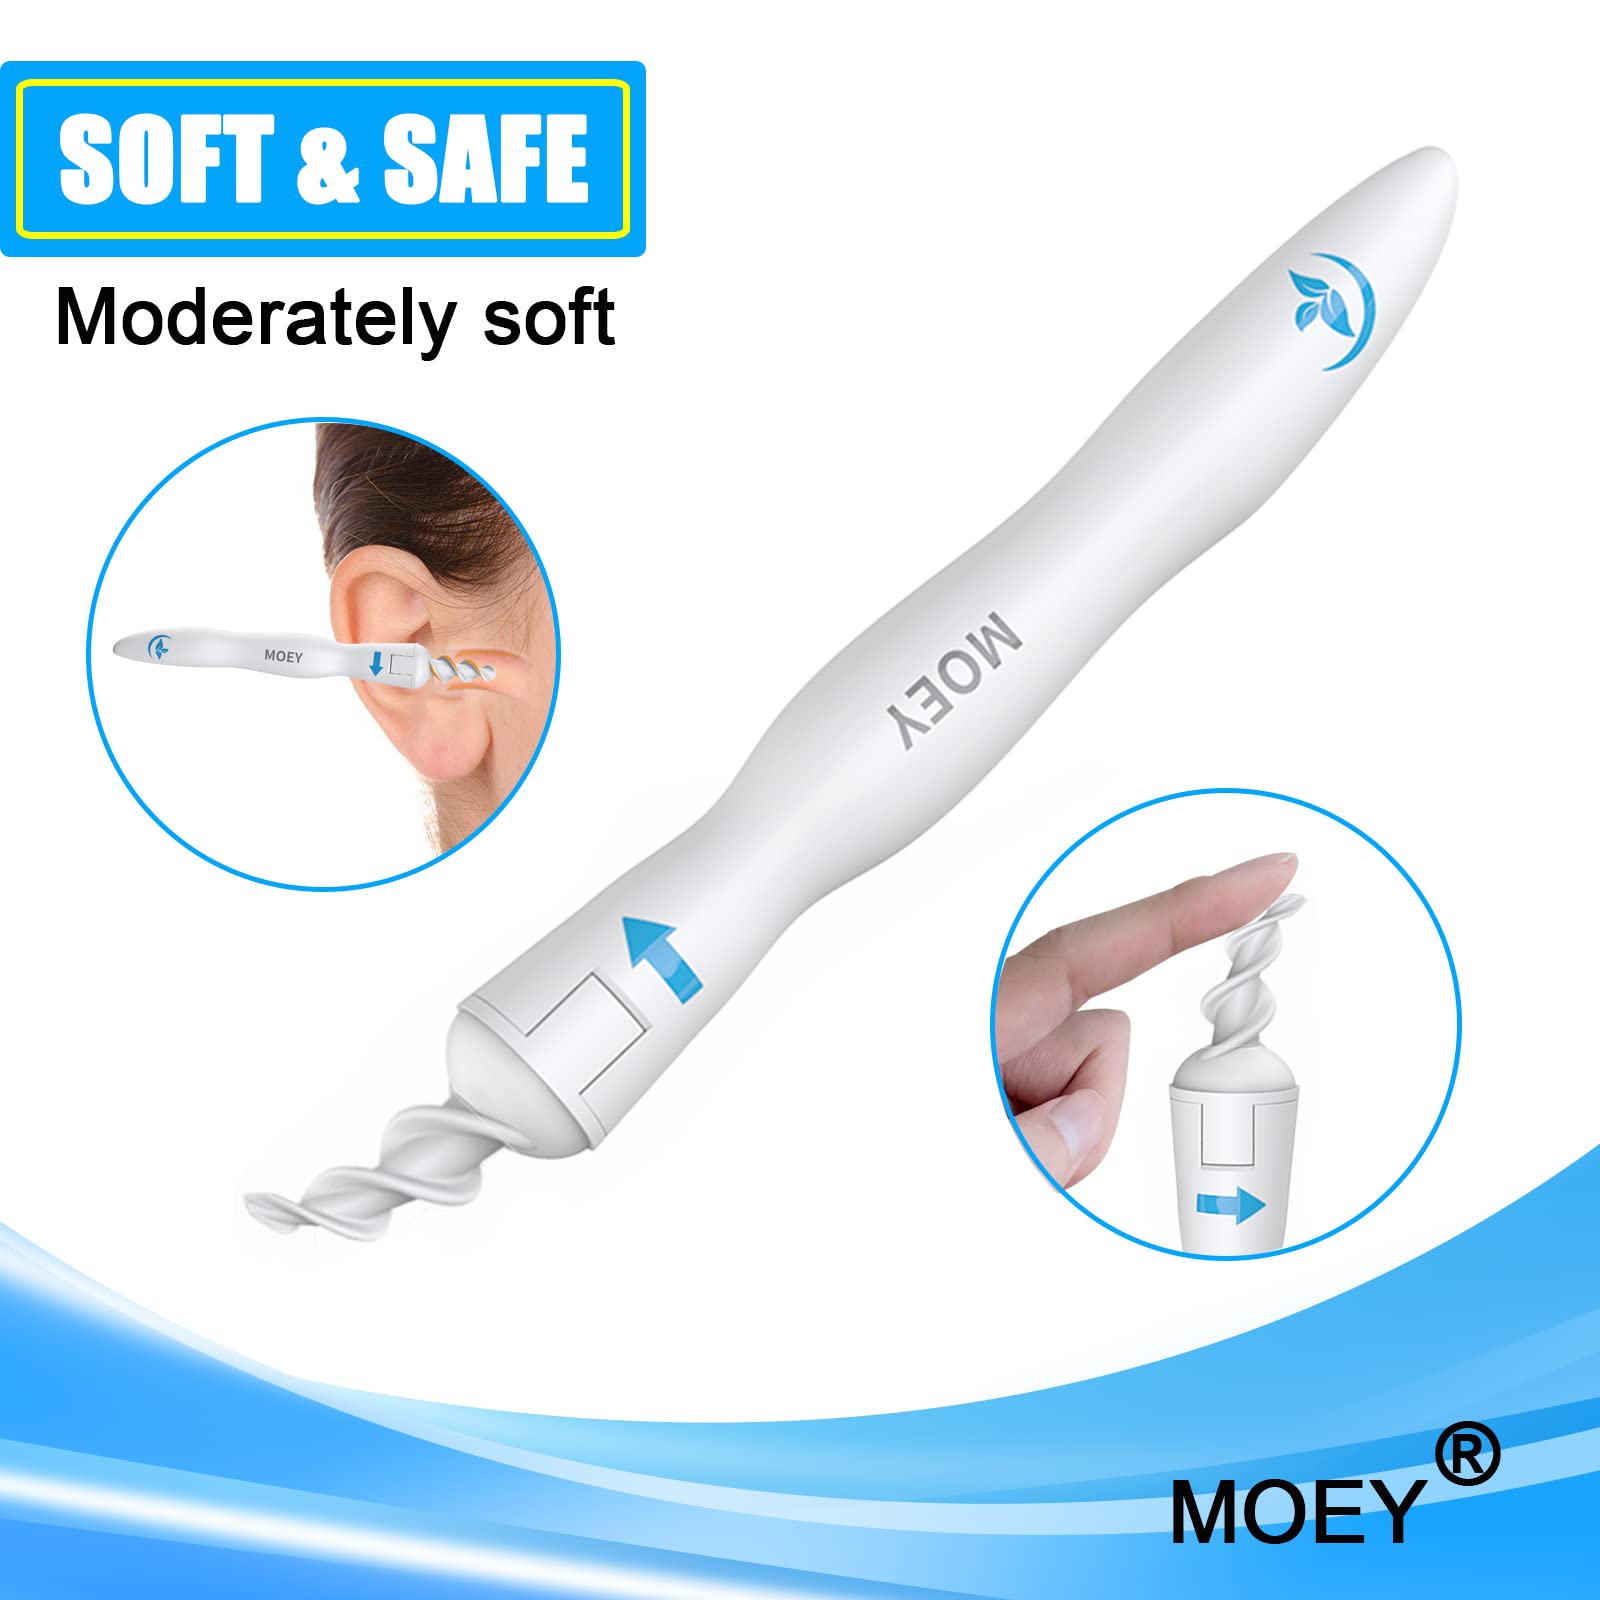 Ear Wax Removal，Earwax Remover Safe Ear Wax Removal Tool,Effective and Comfortable Spiral Ear Wax Removal Solution.Ear Cleaner with 16 Pcs Soft and Flexible Replacement Tips for Everyone